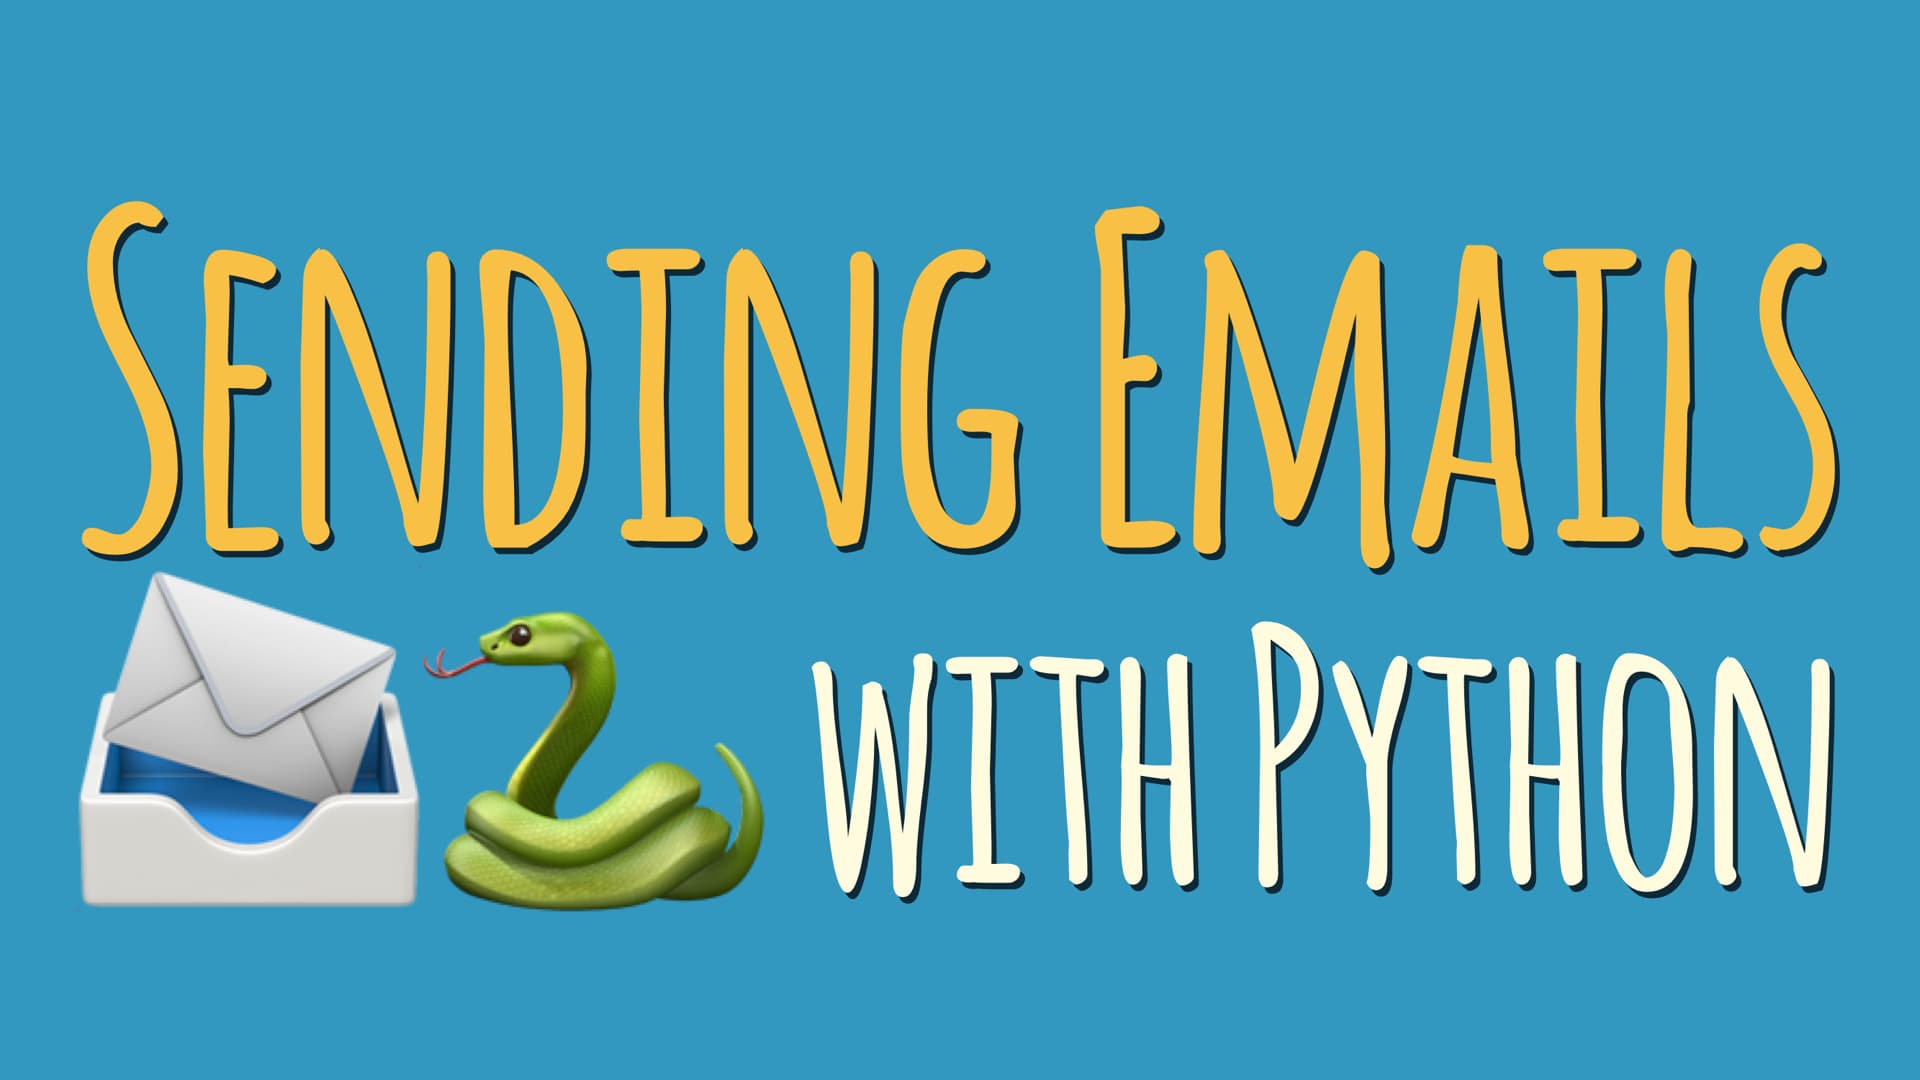 How to Send an Email With Python